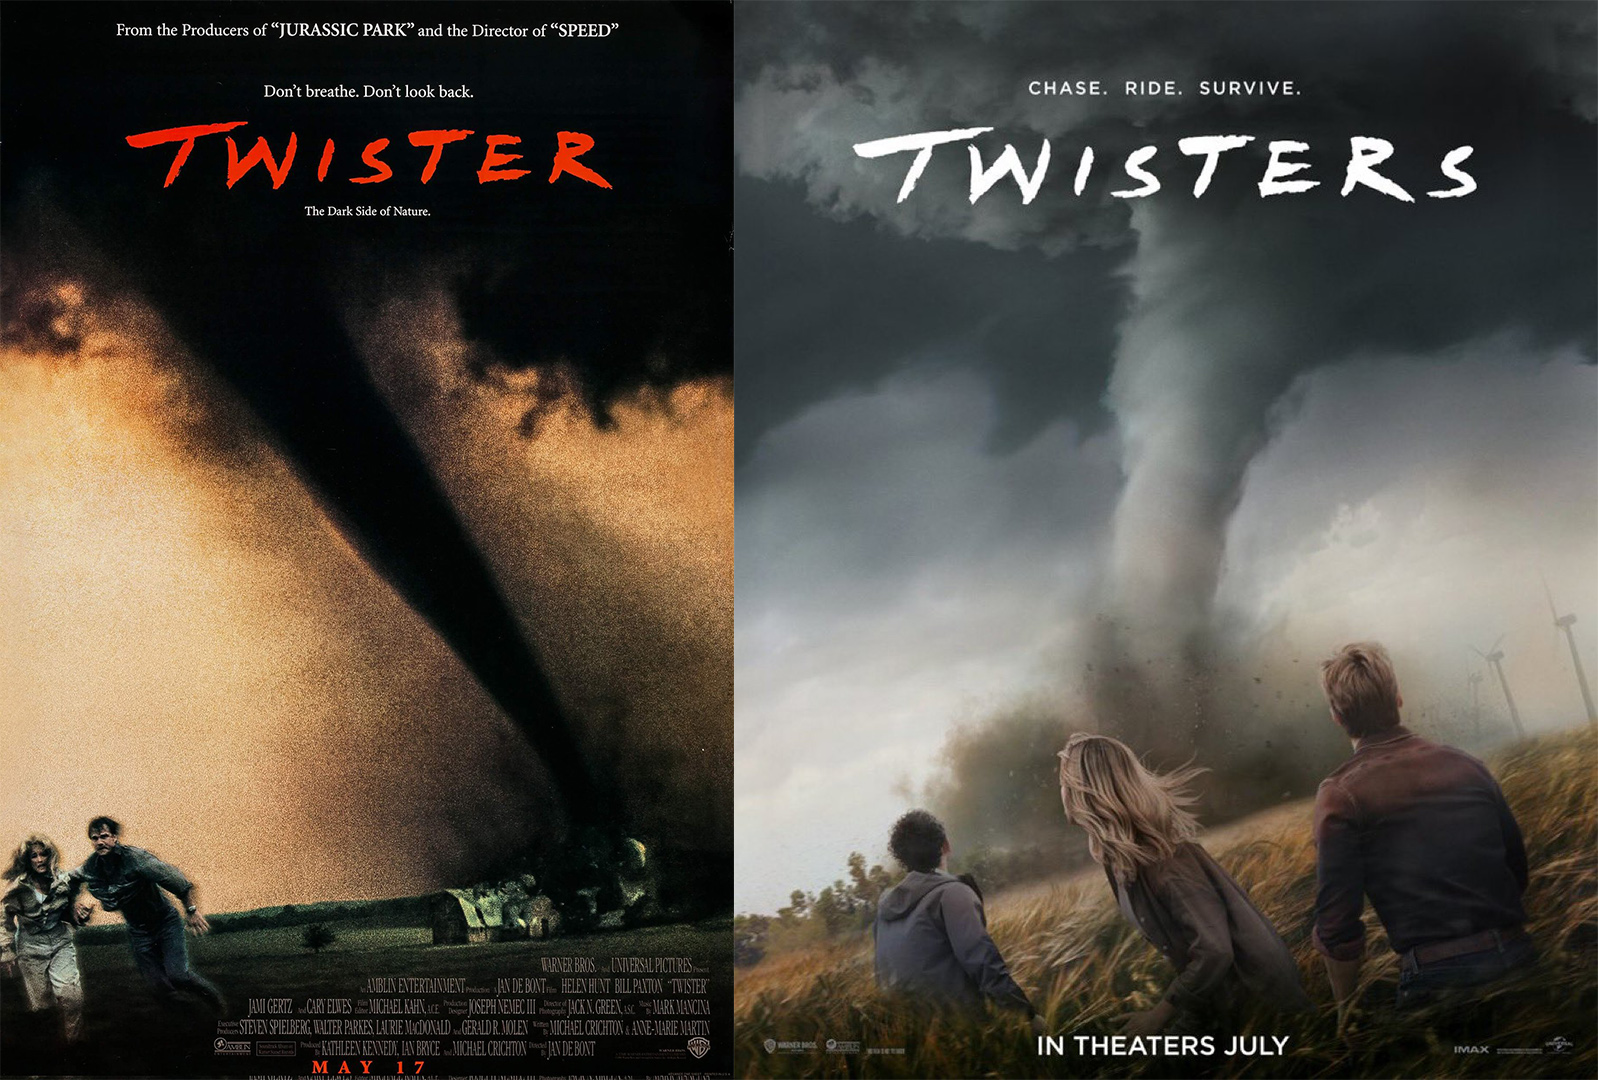 New Twisters poster is an spin on the…